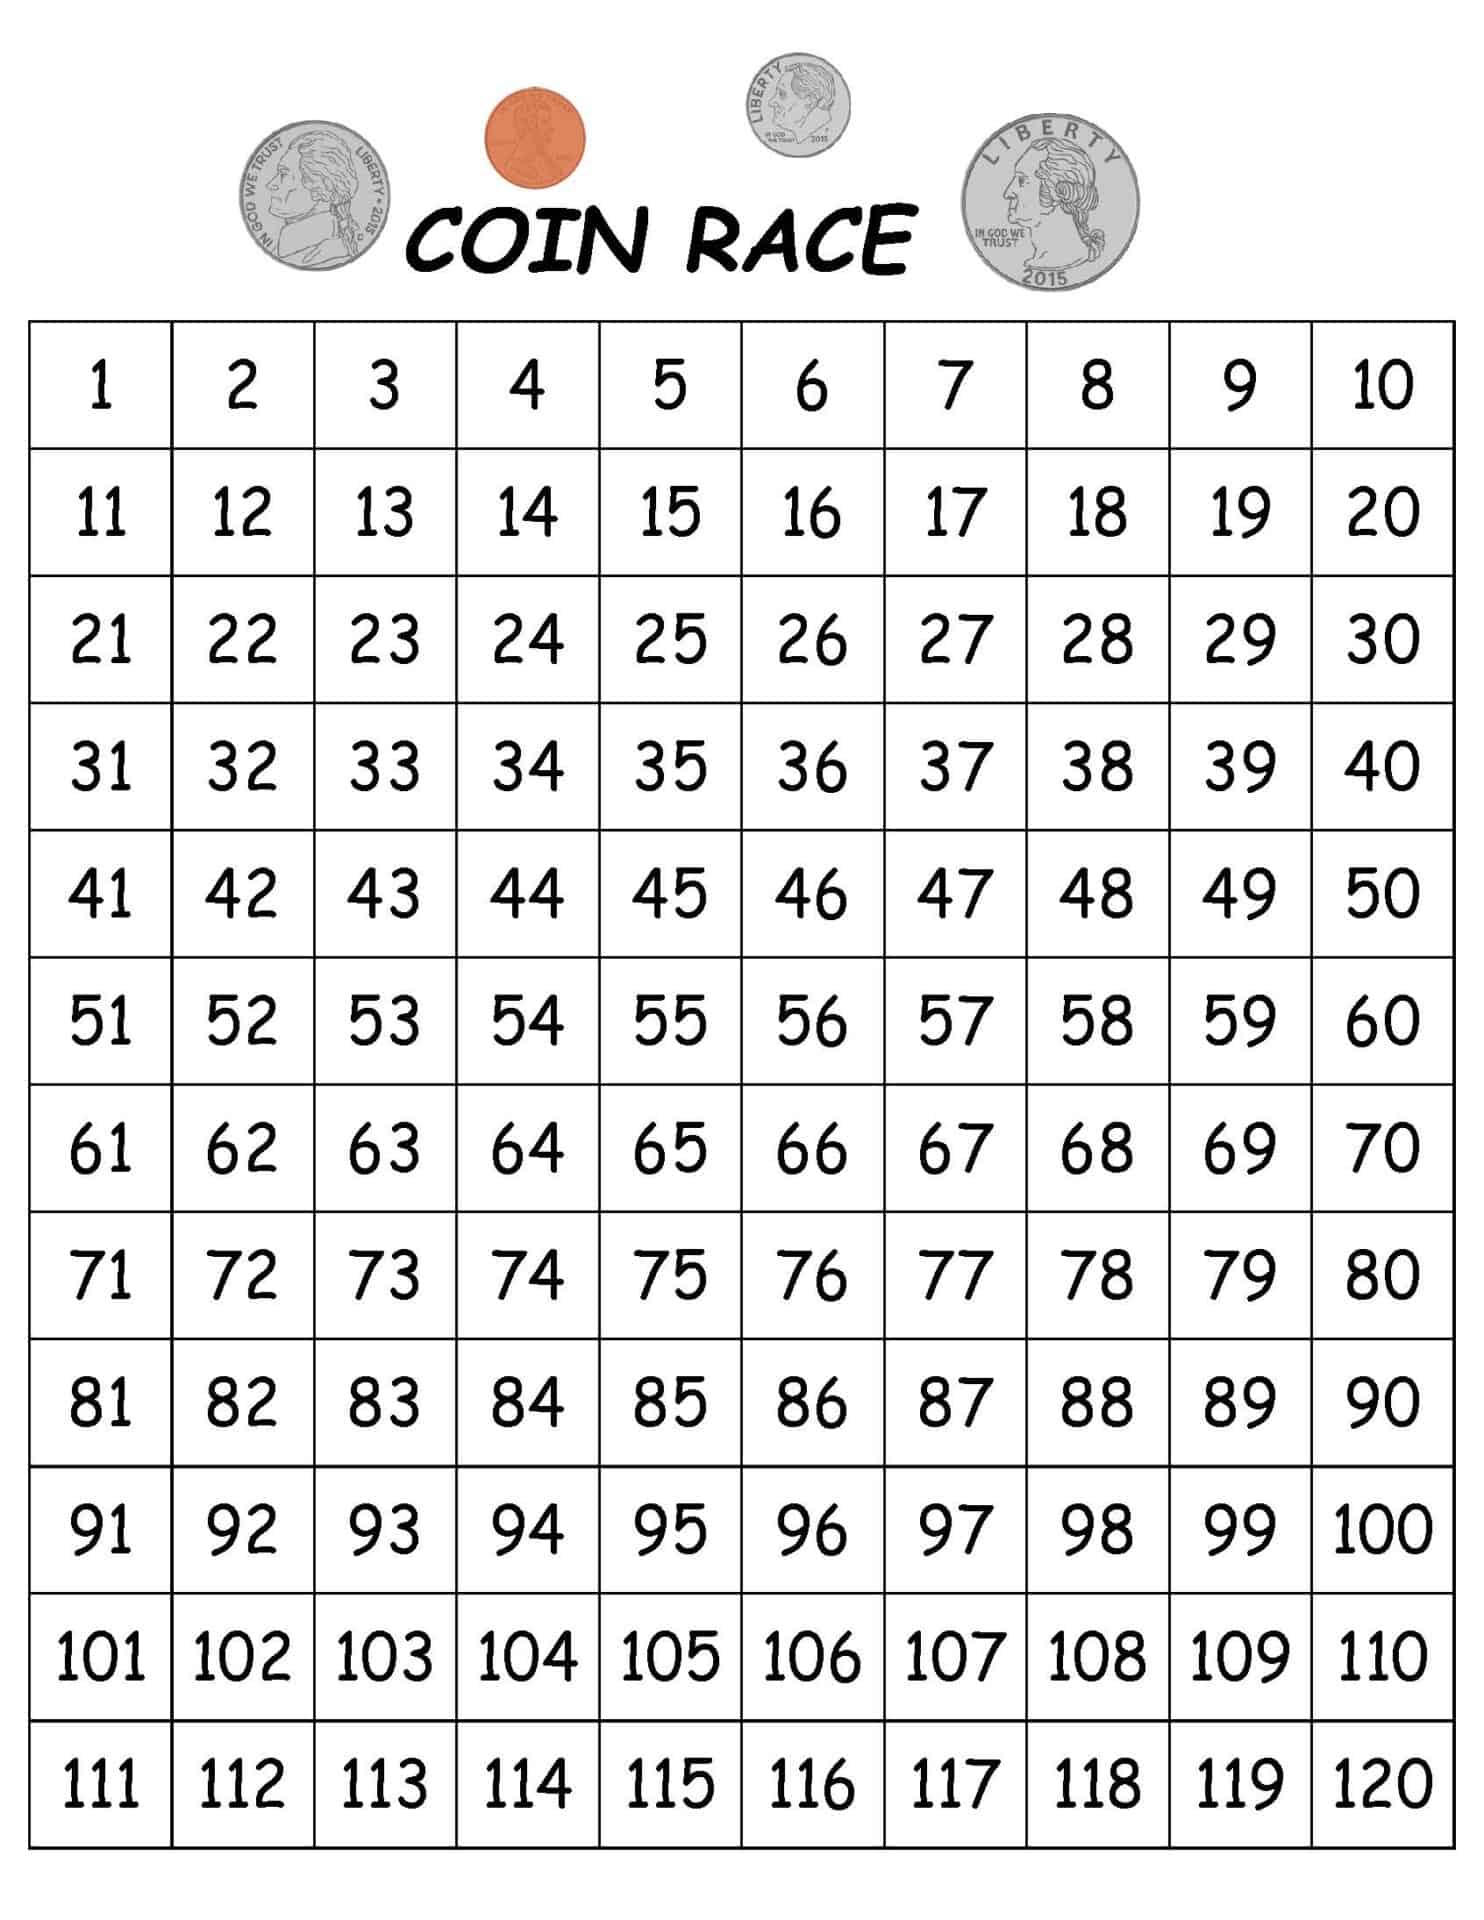 Coin Recognition Game | Free Printable